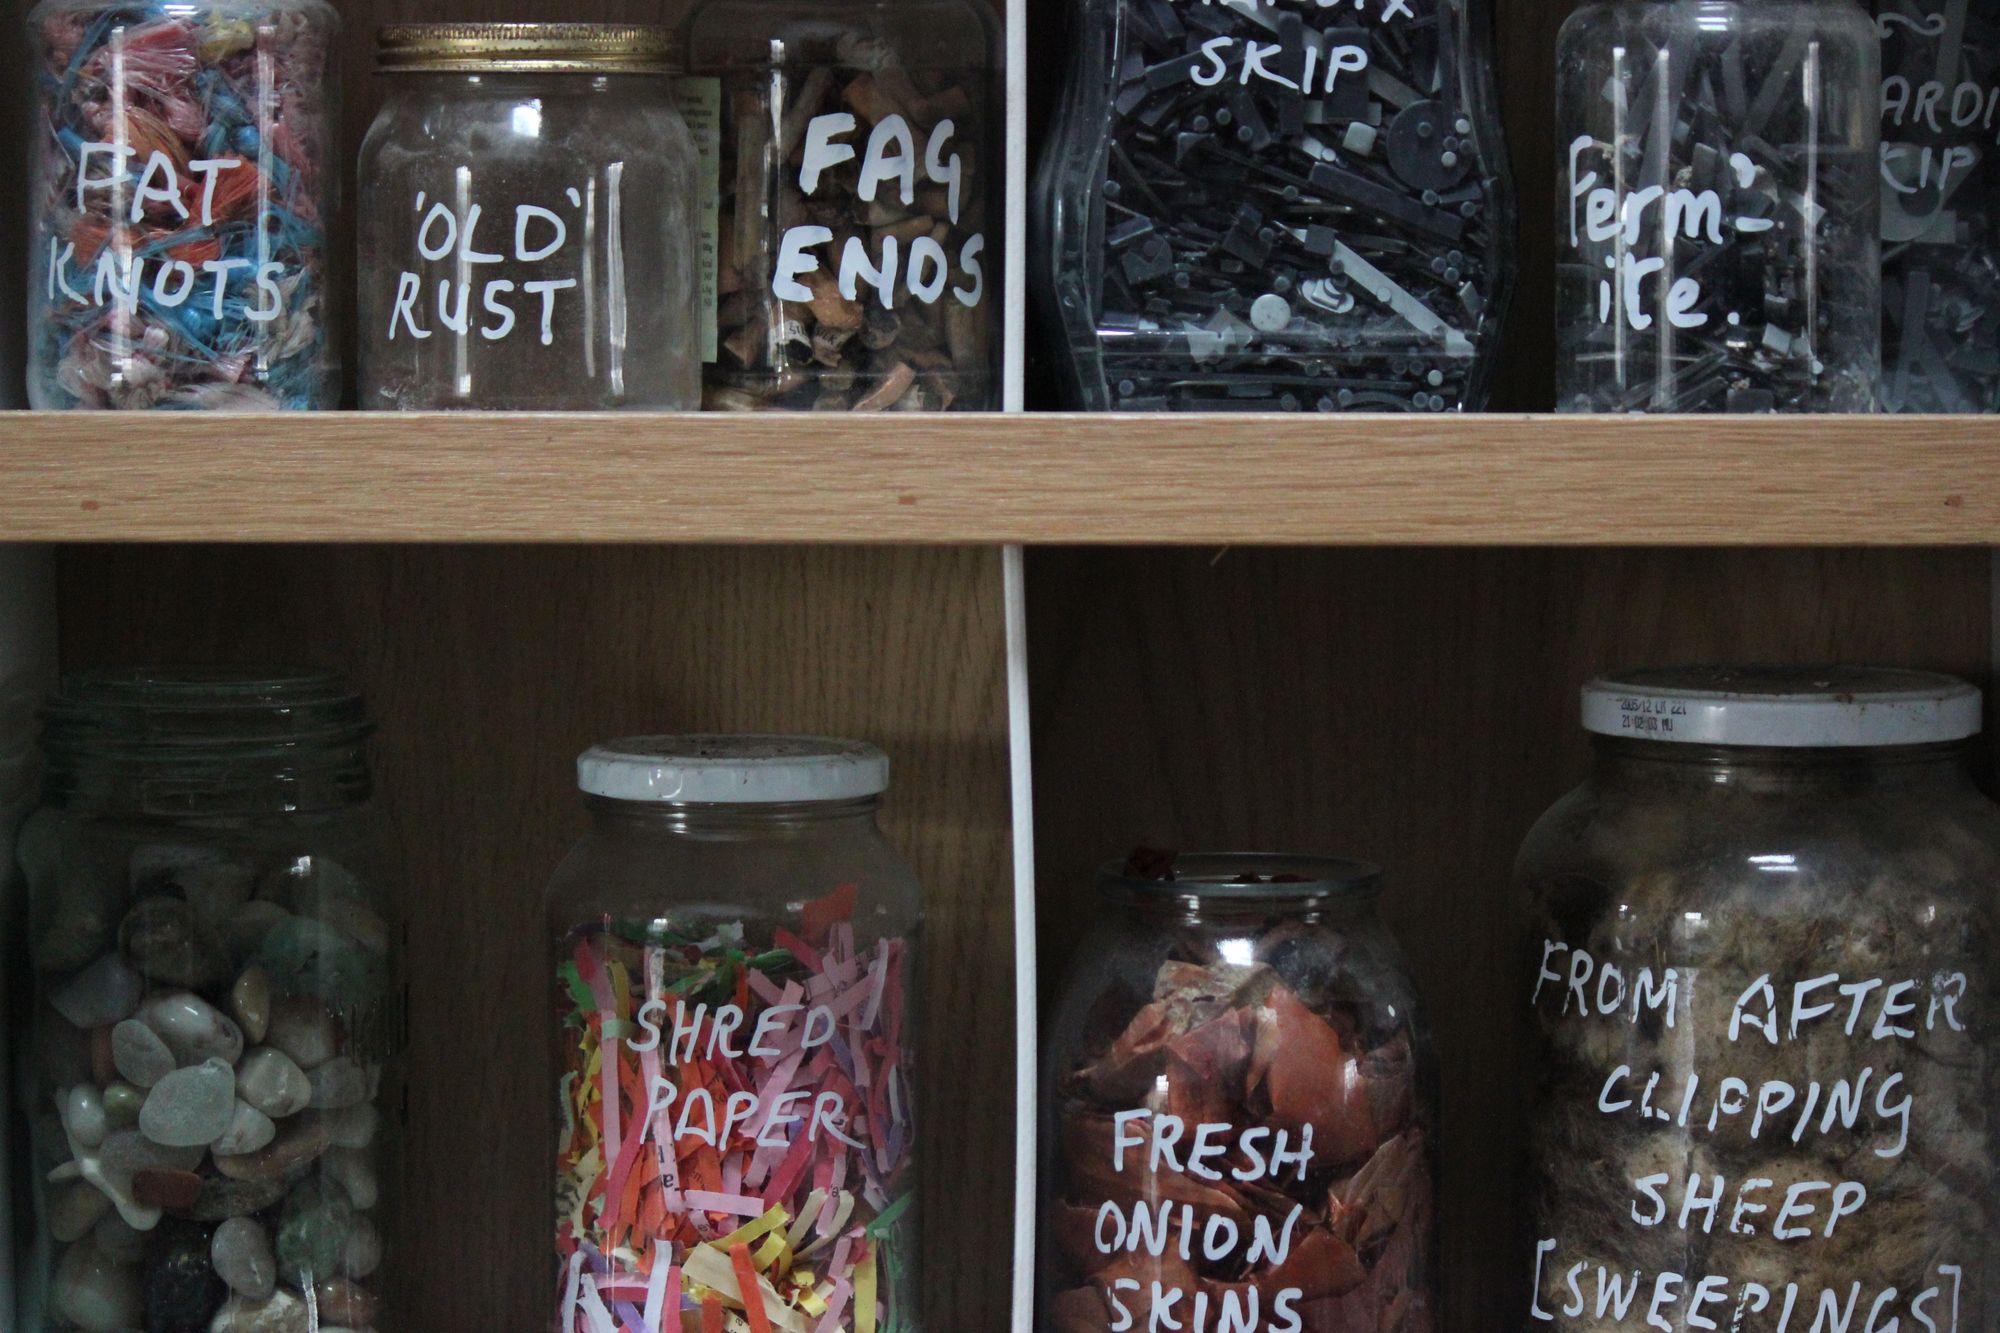 Edward's Very Nicely Organised and Displayed Odd Things in Jars